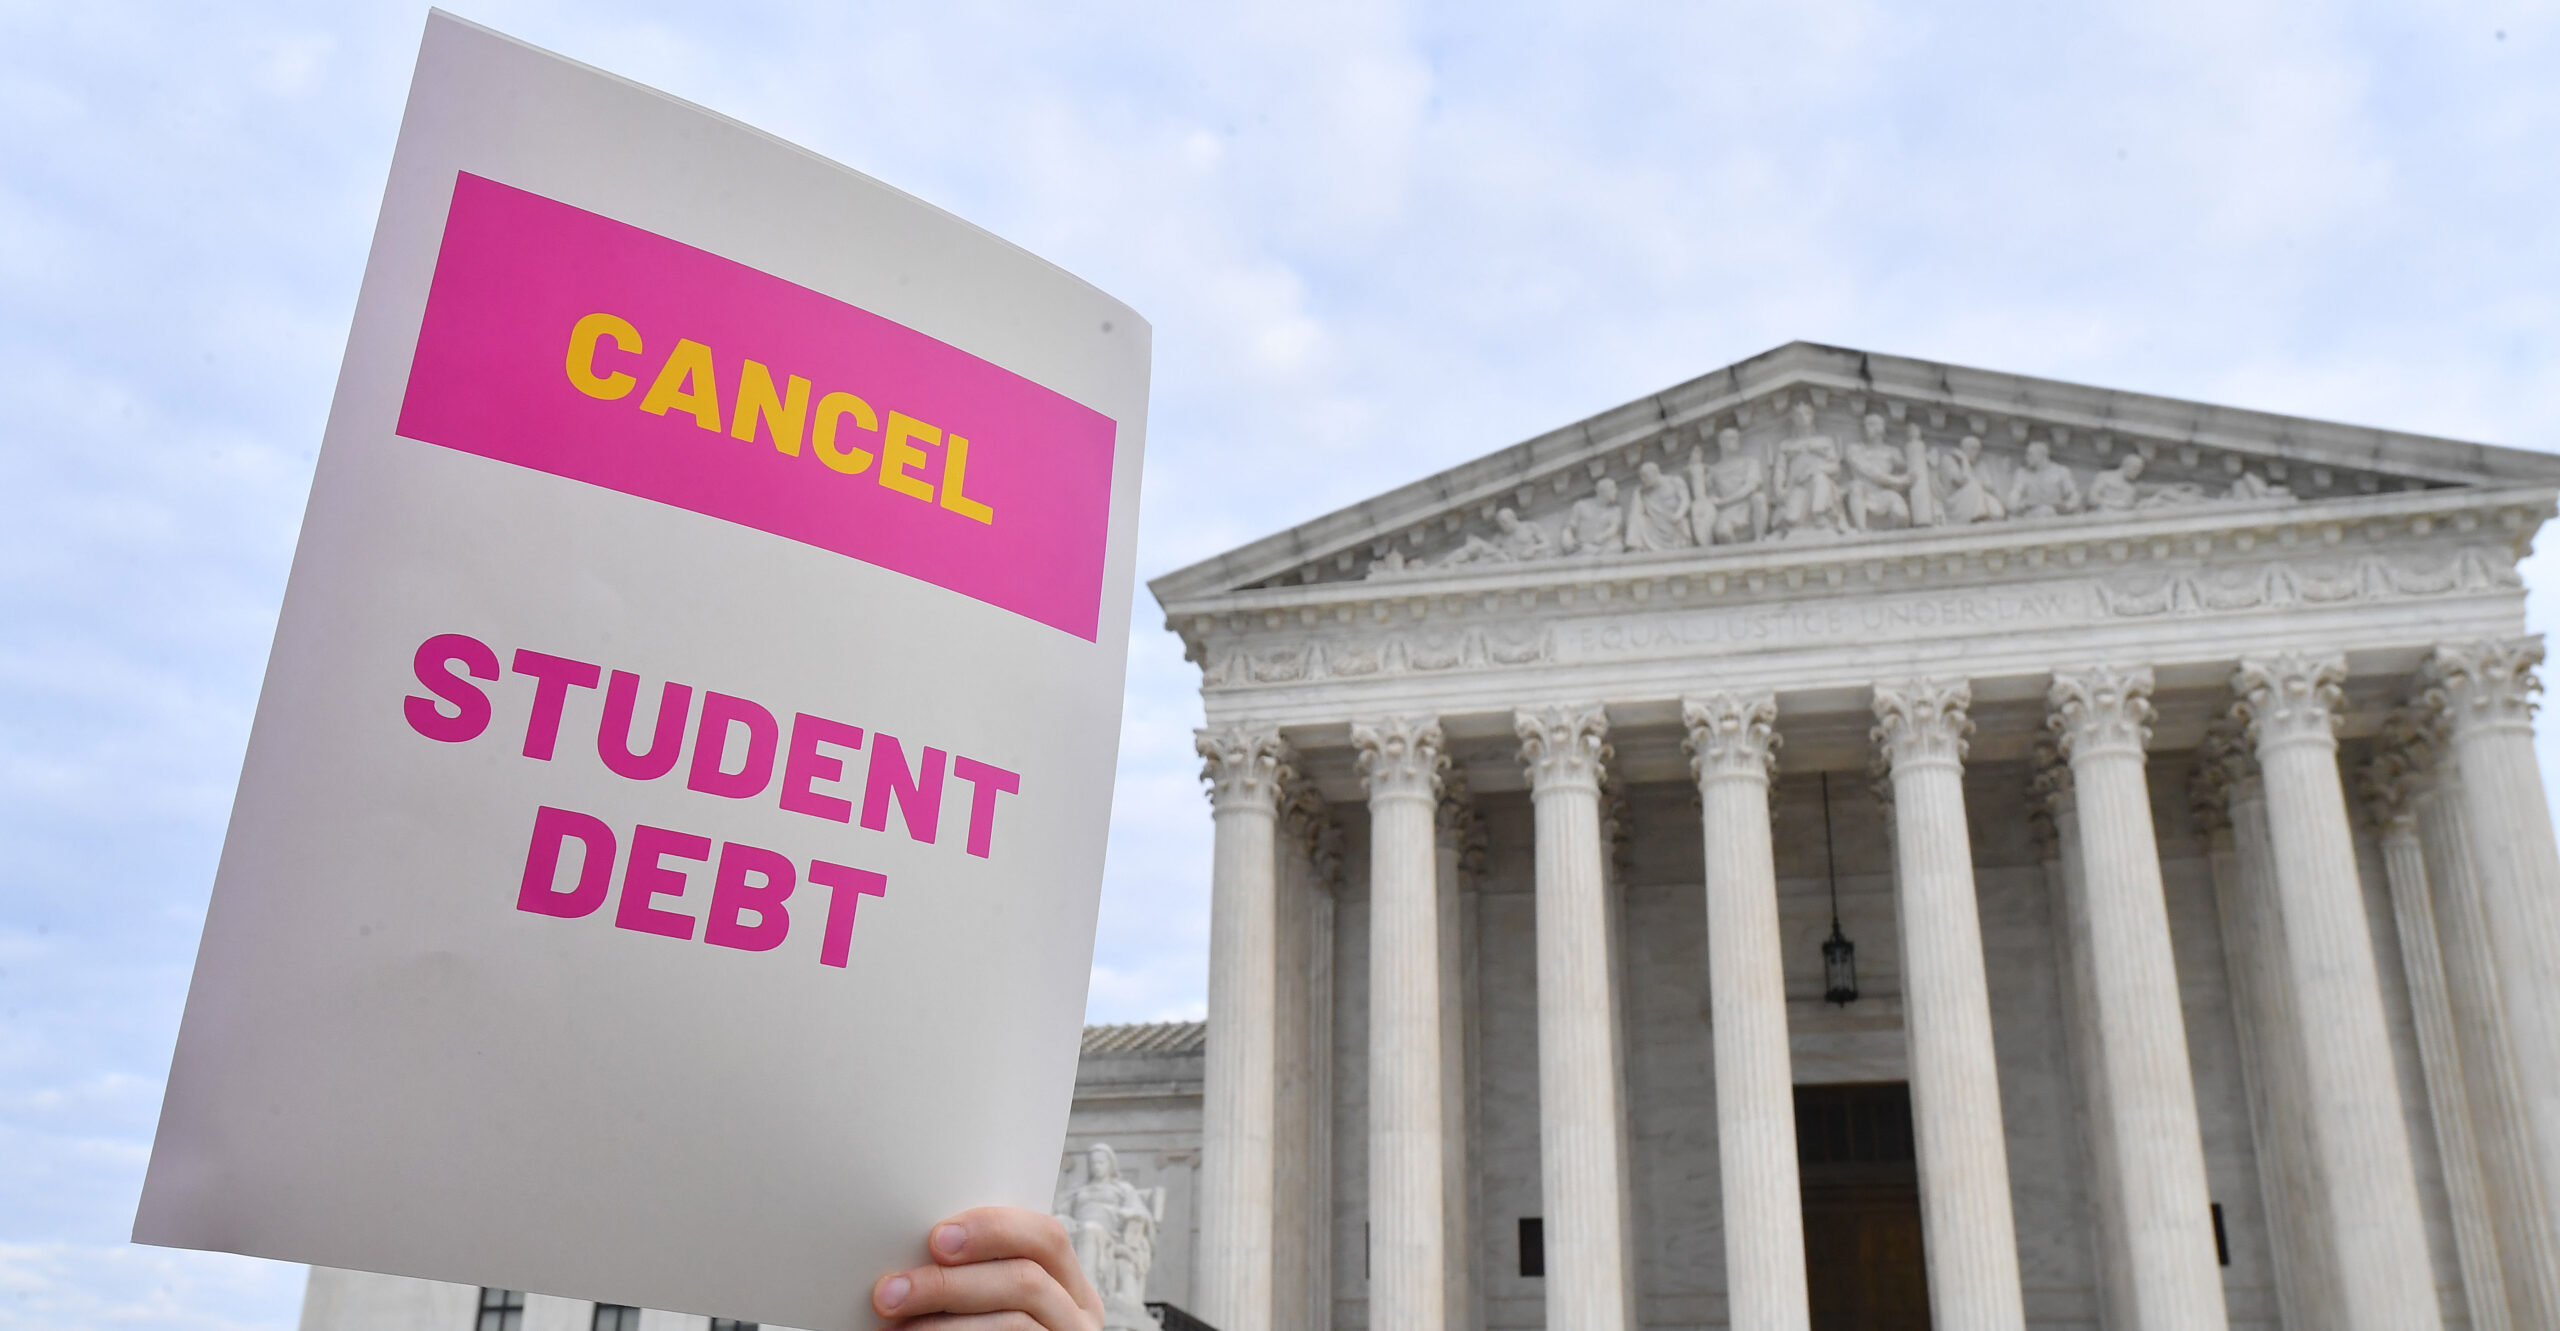 A Biden Loss in Student Loan Forgiveness Case Would Be Third Defeat in Supreme Court on Executive Overreach